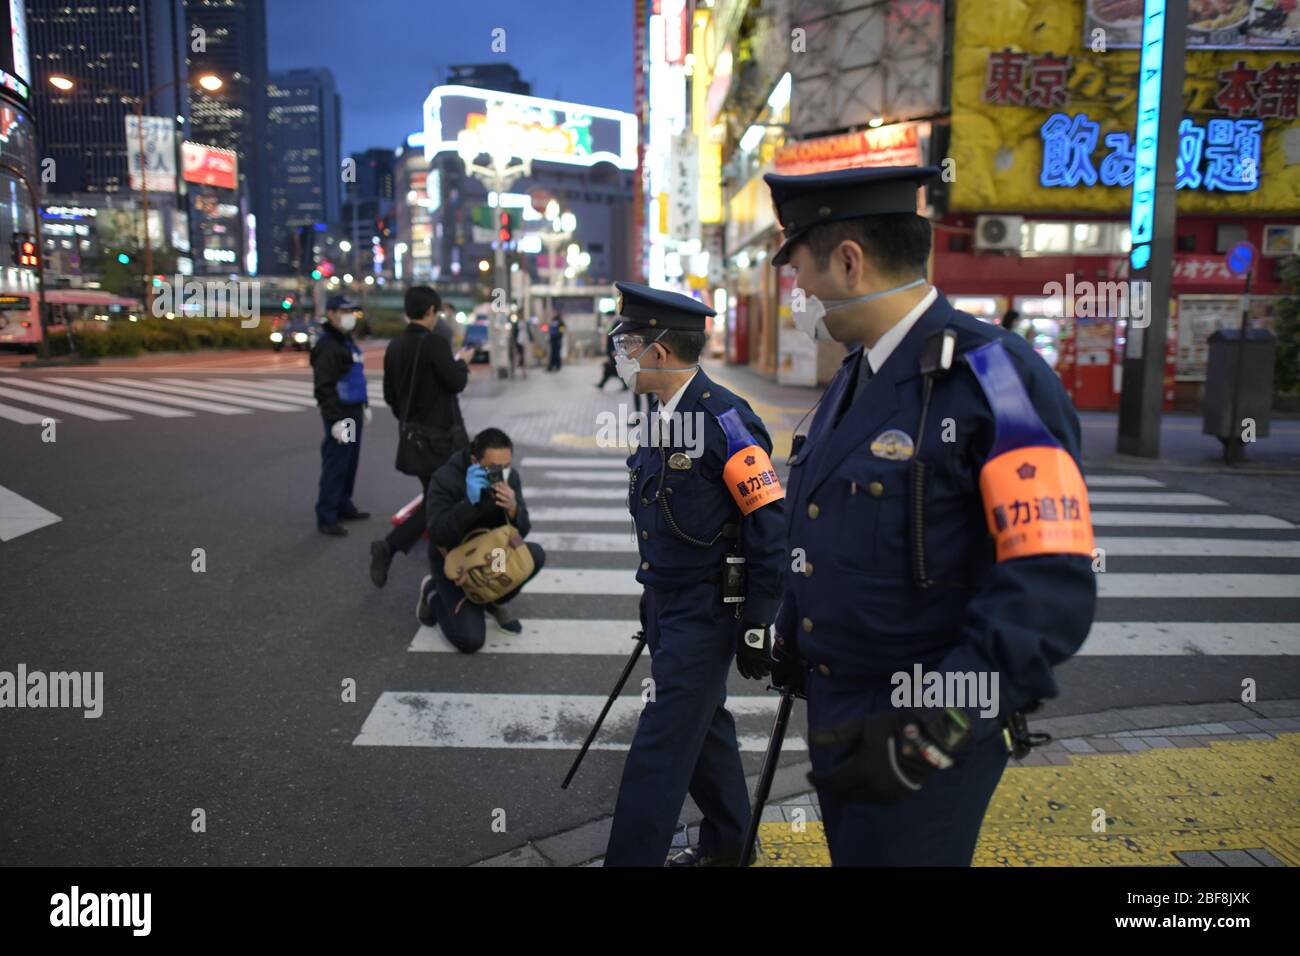 TOKYO, JAPAN - APRIL 17: Police officers watch around the Kabukicho entertainment district amid the coronavirus pandemic on April 17, 2020 in Tokyo. The government of Japan has requested that businesses including schools, athletic facilities, bars and restaurants to temporarily close or operate under reduced hours during Nationwide State of Emergency. The Japanese government decided to expand the current areas under a state of emergency to nationwide, as the Covid-19 coronavirus outbreak continues to spread throughout the country. Credit: Aflo Co. Ltd./Alamy Live News Stock Photo